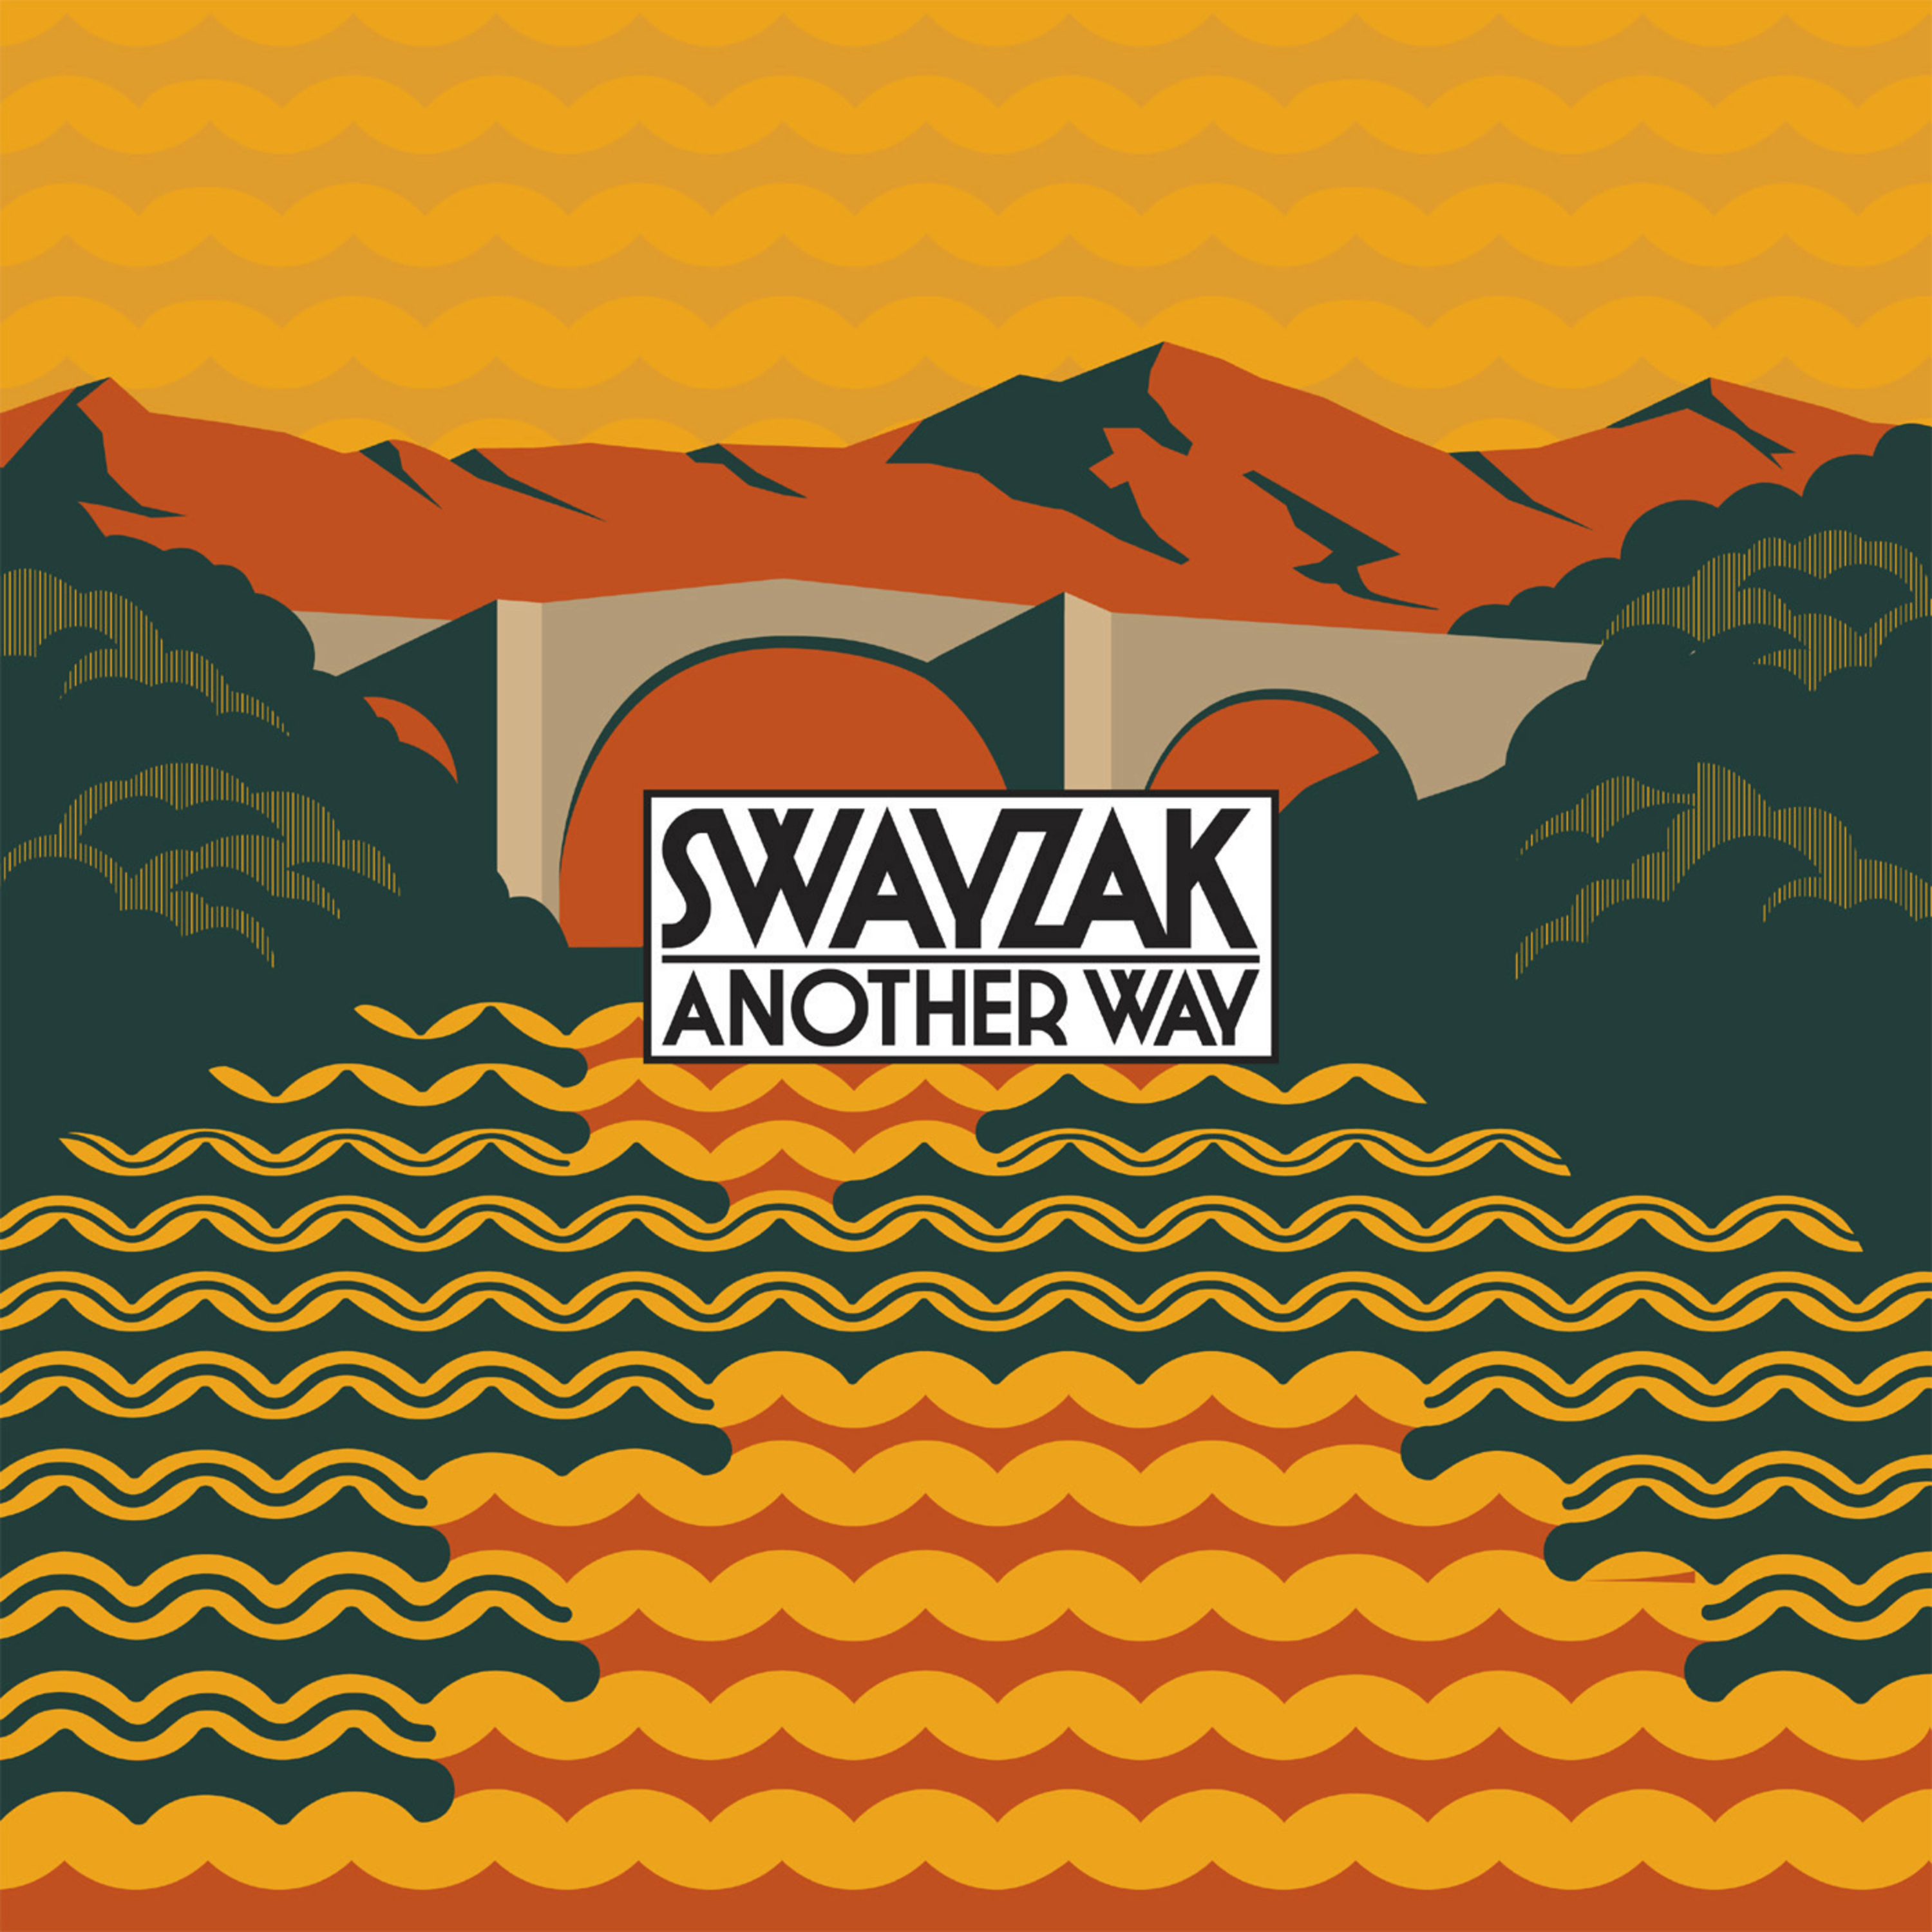 This another way. Swayzak. Loops from the Bergerie Swayzak. Swayzak 1997. Swayzak – ra.069.